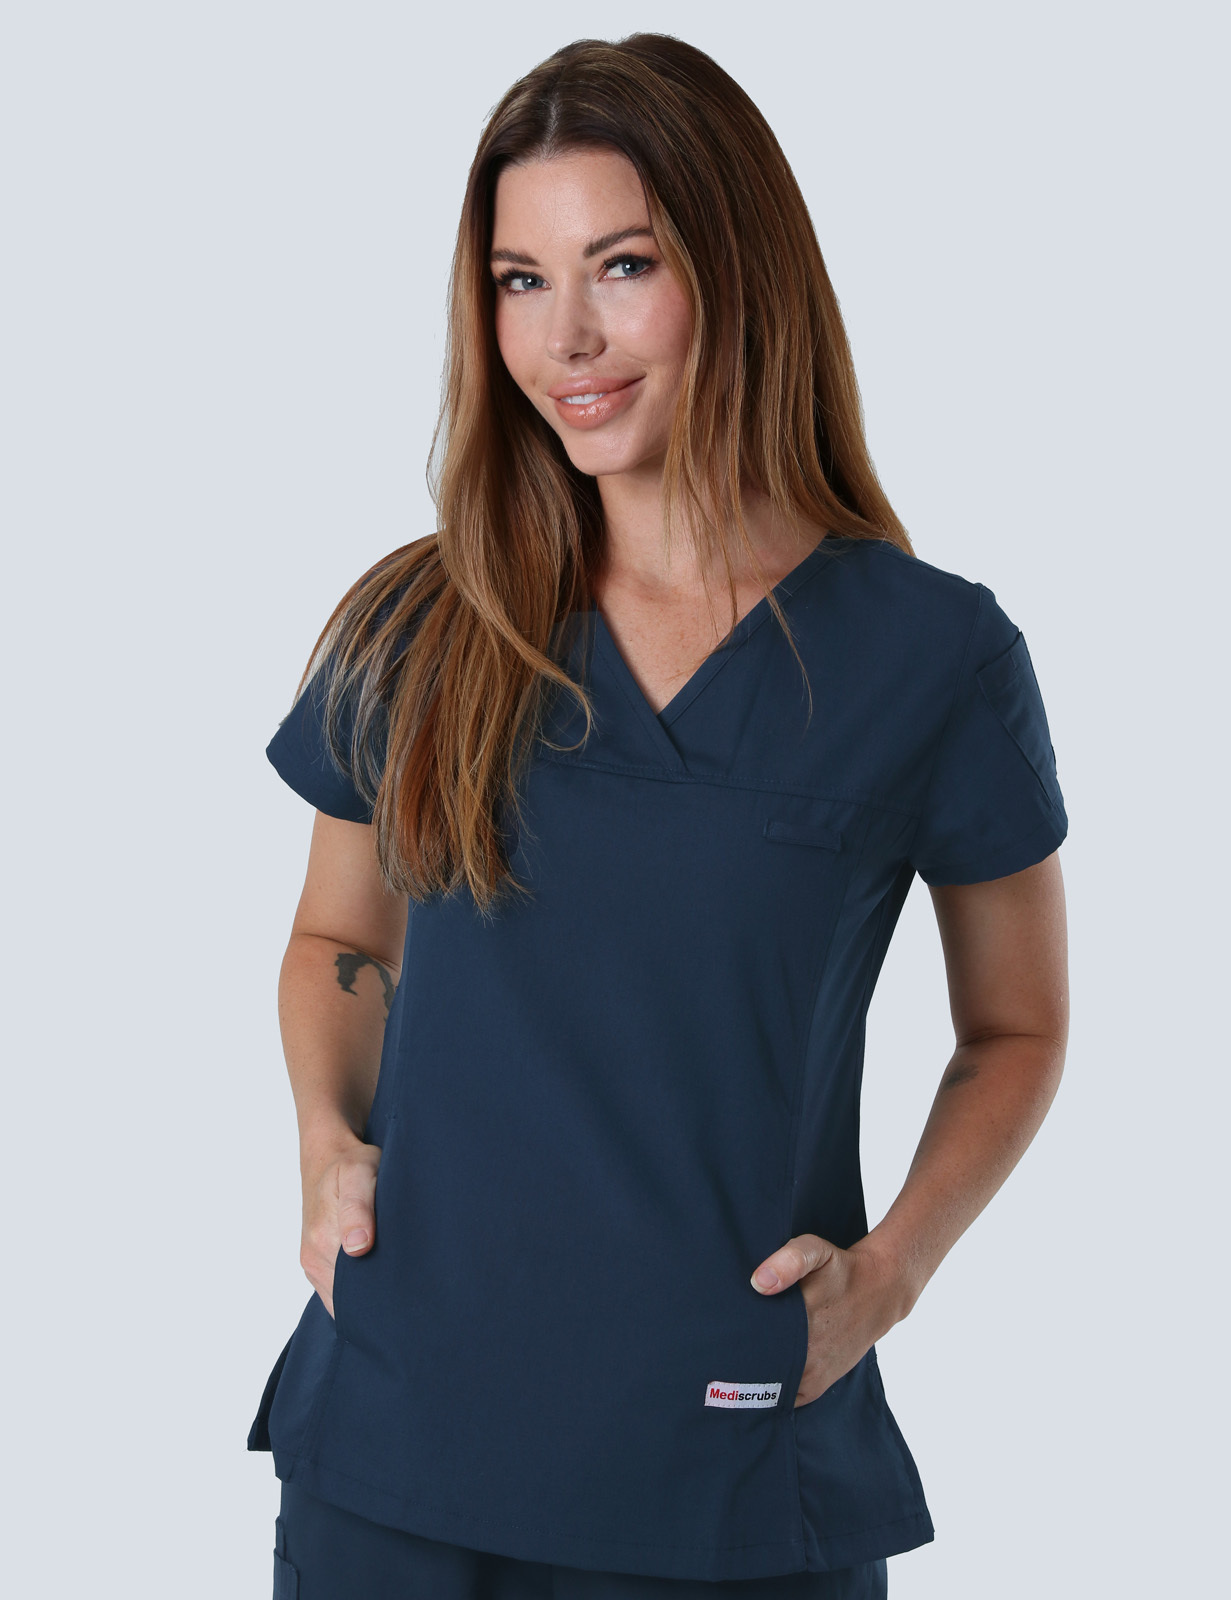 Redcliffe Hospital - ICU (Women's Fit Solid Scrub Top in Navy incl Logos)